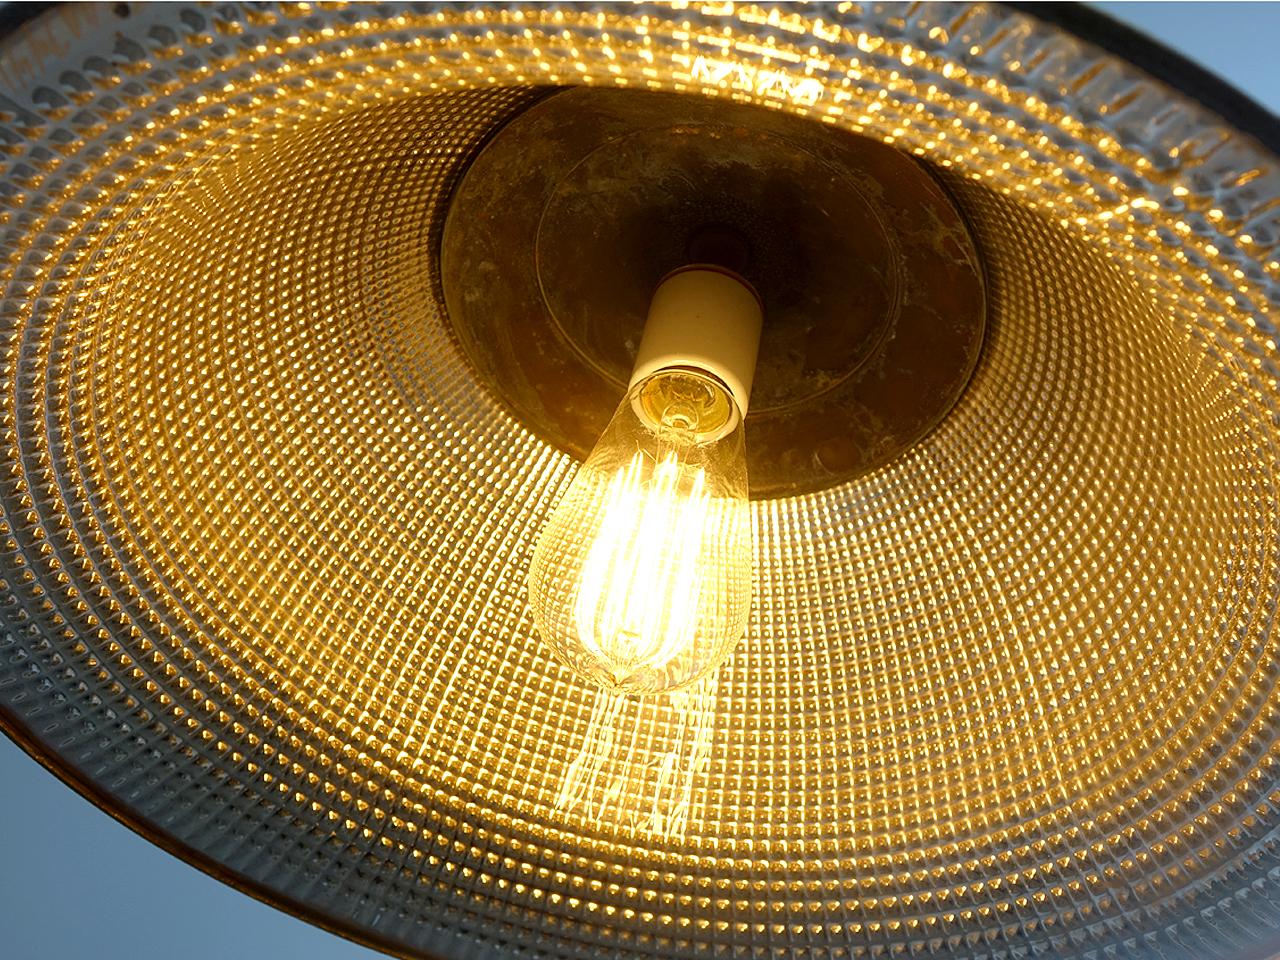 These huge mercury glass reflectors are not common and the shape on these have just the right look. They have a unique Waffle pattern. With a 16 inch diameter they must be the largest examples made by the Permaflector Lamp Co. The outside is a